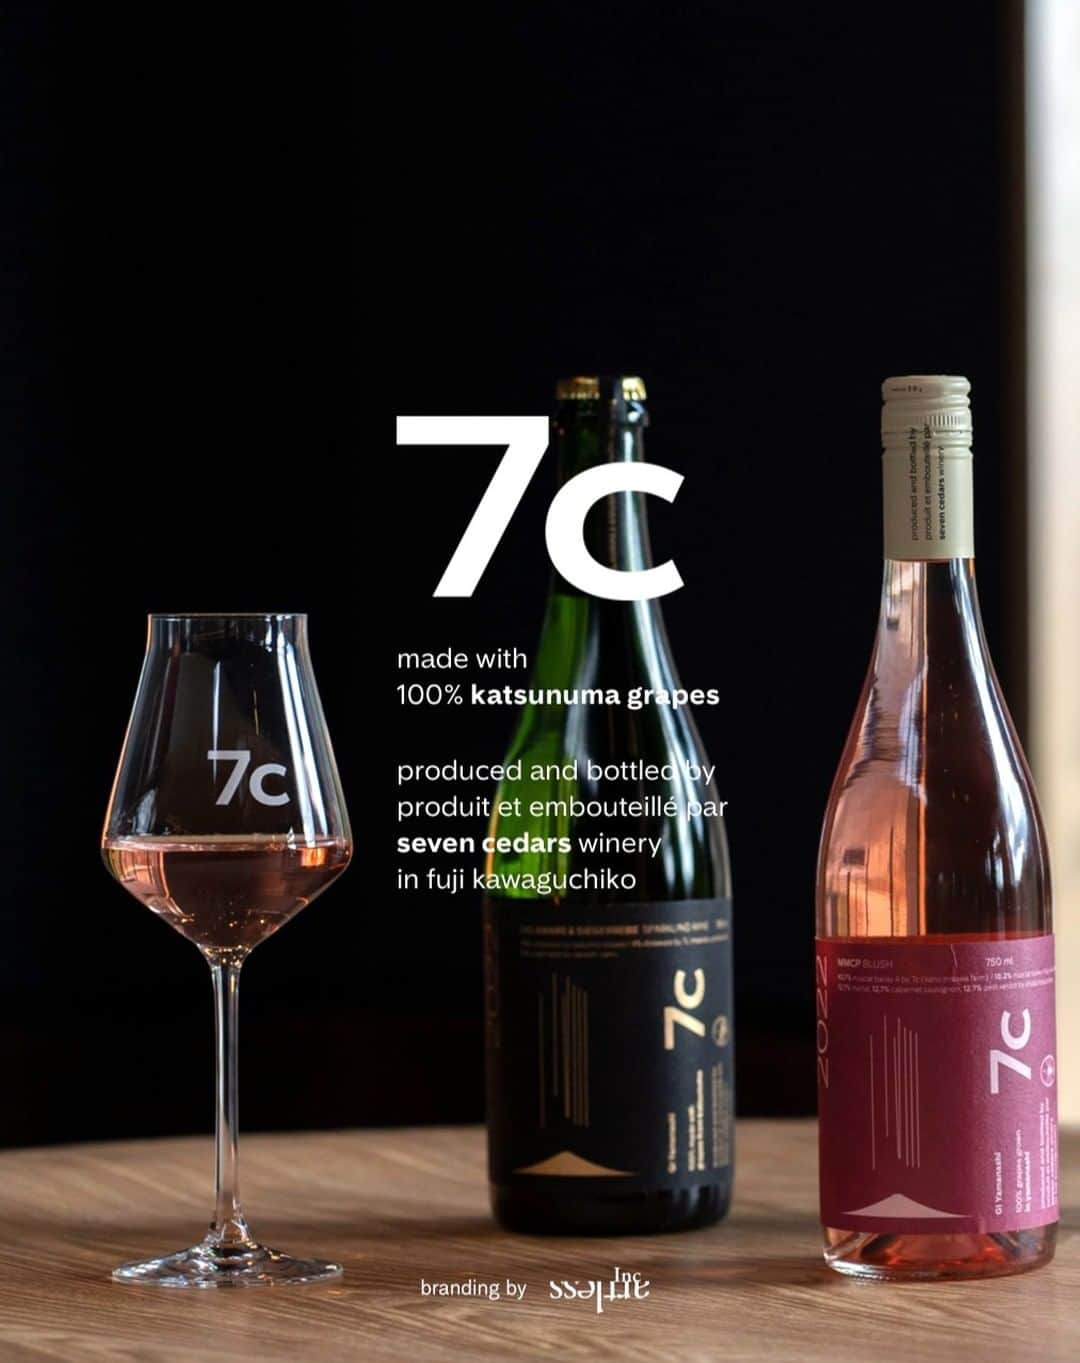 川上俊さんのインスタグラム写真 - (川上俊Instagram)「[branding] 7c winery (seven ciders winery) : www.7cwinery.com  branding & design by artless Inc. @shunkawakami   河口湖にはじめてオープンしたワイナリー「7c | seven cedars winery」@7cwinery @7cwinery_store 。新たなコンセプトの日本ワインをグローバルに届くようにブランドデザインを行ない、また、できれば日本のワインの価値やポジショニングを上げるためにもデザインのクオリティも世界基準で行うことを意識しデザインしています。  日本醸造家100人にも選ばれている女性醸造家の鷹野ひろ子さんの葡萄栽培者に光を当てたワイン造り。全ての製品に栽培者の名前と、葡萄の品種・構成比率を明記し、デザインやカラーなどにも反映させています。  「7c | seven cedars winery」の名は、オーナー家の家系と繋がってもいる 河口浅間神社（ 865年奉斎 ）の神木・７本の「千本杉」を見させてもらった時の強い記憶から「千年杉」由来のブランドネーミングとして名付けさせてもらいました。  このワインブランドが、日本を代表するようなブランドへ成長していくことを楽しみに並走していこうと思います。  ー We are branding a new winery that opened for the first time in Kawaguchiko Japan. We are designing a brand for a new concept of Japanese wine to reach a global market. We are also designing the quality of the design with an awareness of global standards in order to increase the value and positioning of Japanese wine, if possible.  #shunkawakami #artlessinc」3月25日 23時00分 - shunkawakami